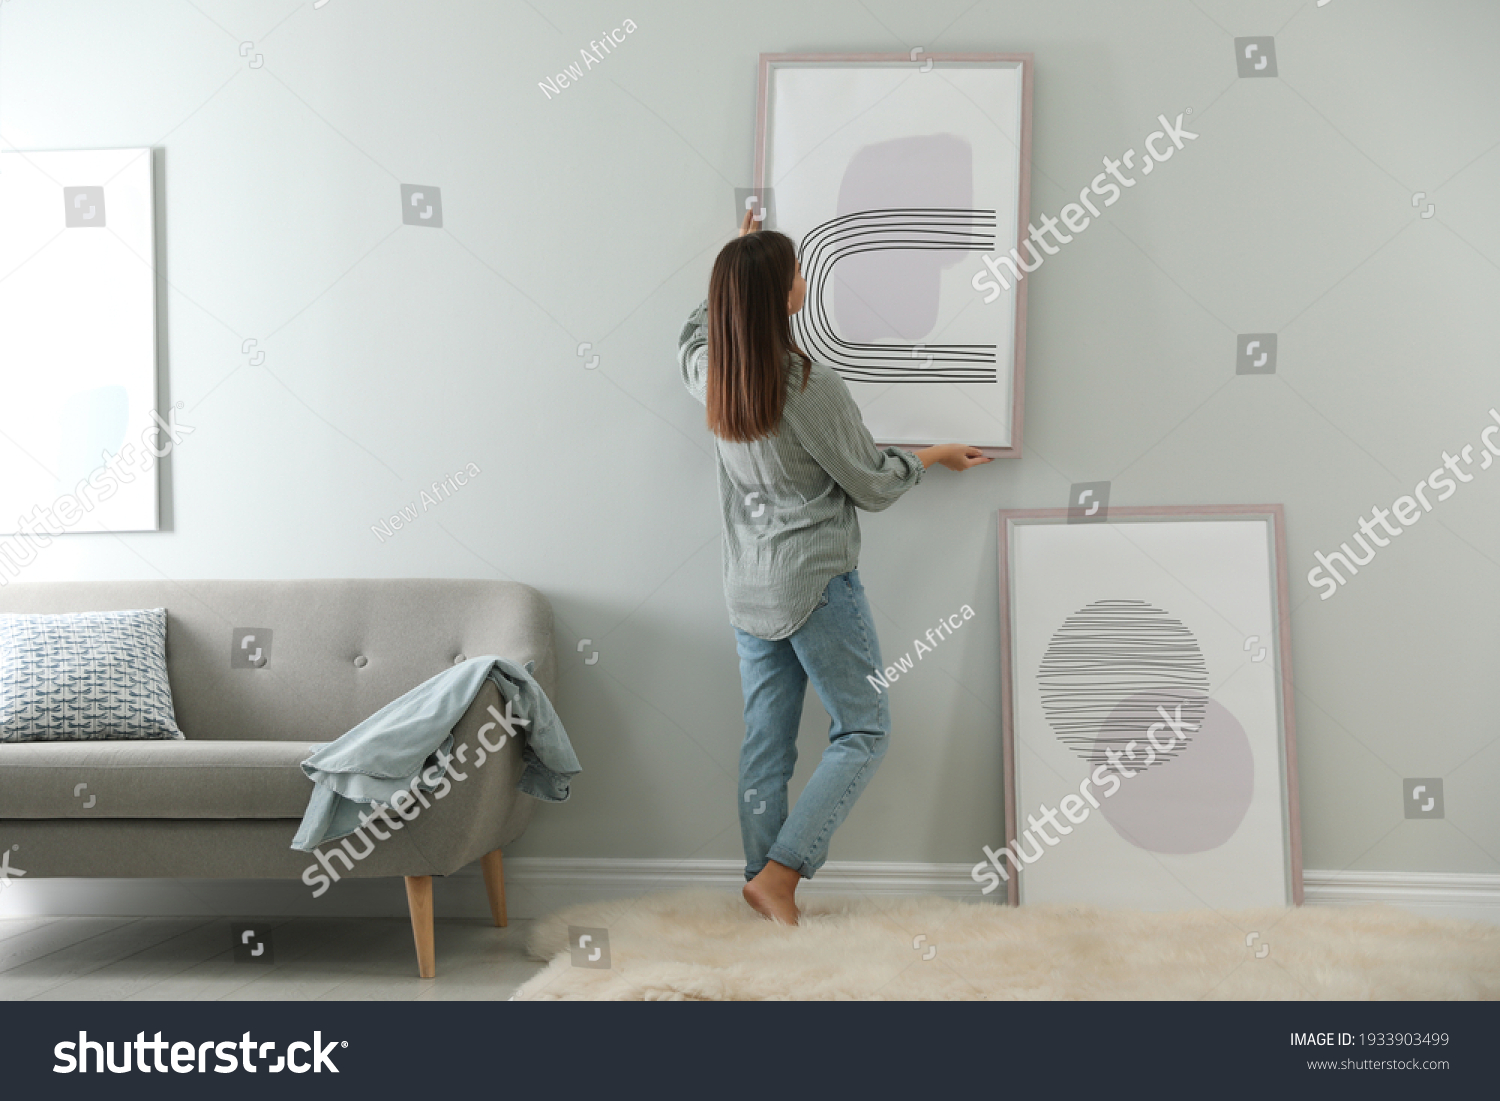 Woman hanging picture on wall in room. Interior design #1933903499